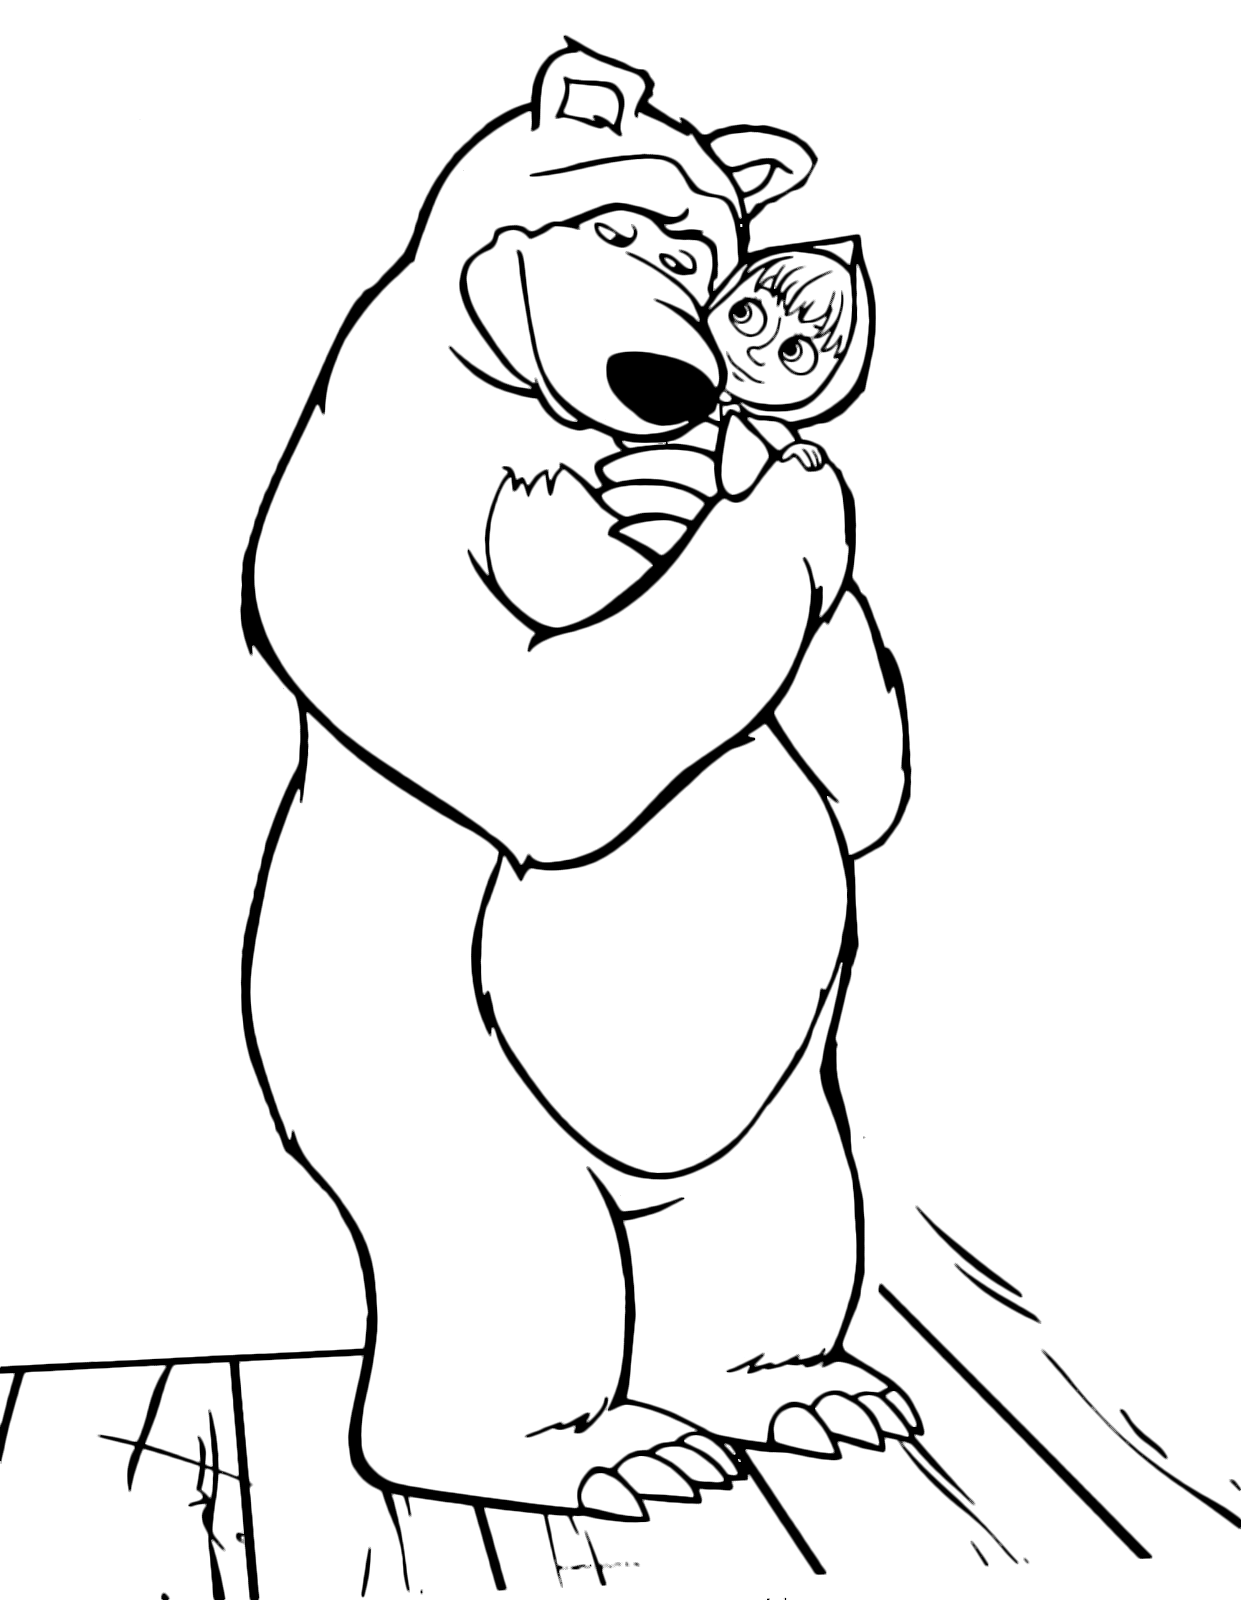 Coloring Pages : Coloring Pagesasha And The Bear Y El Oso ...